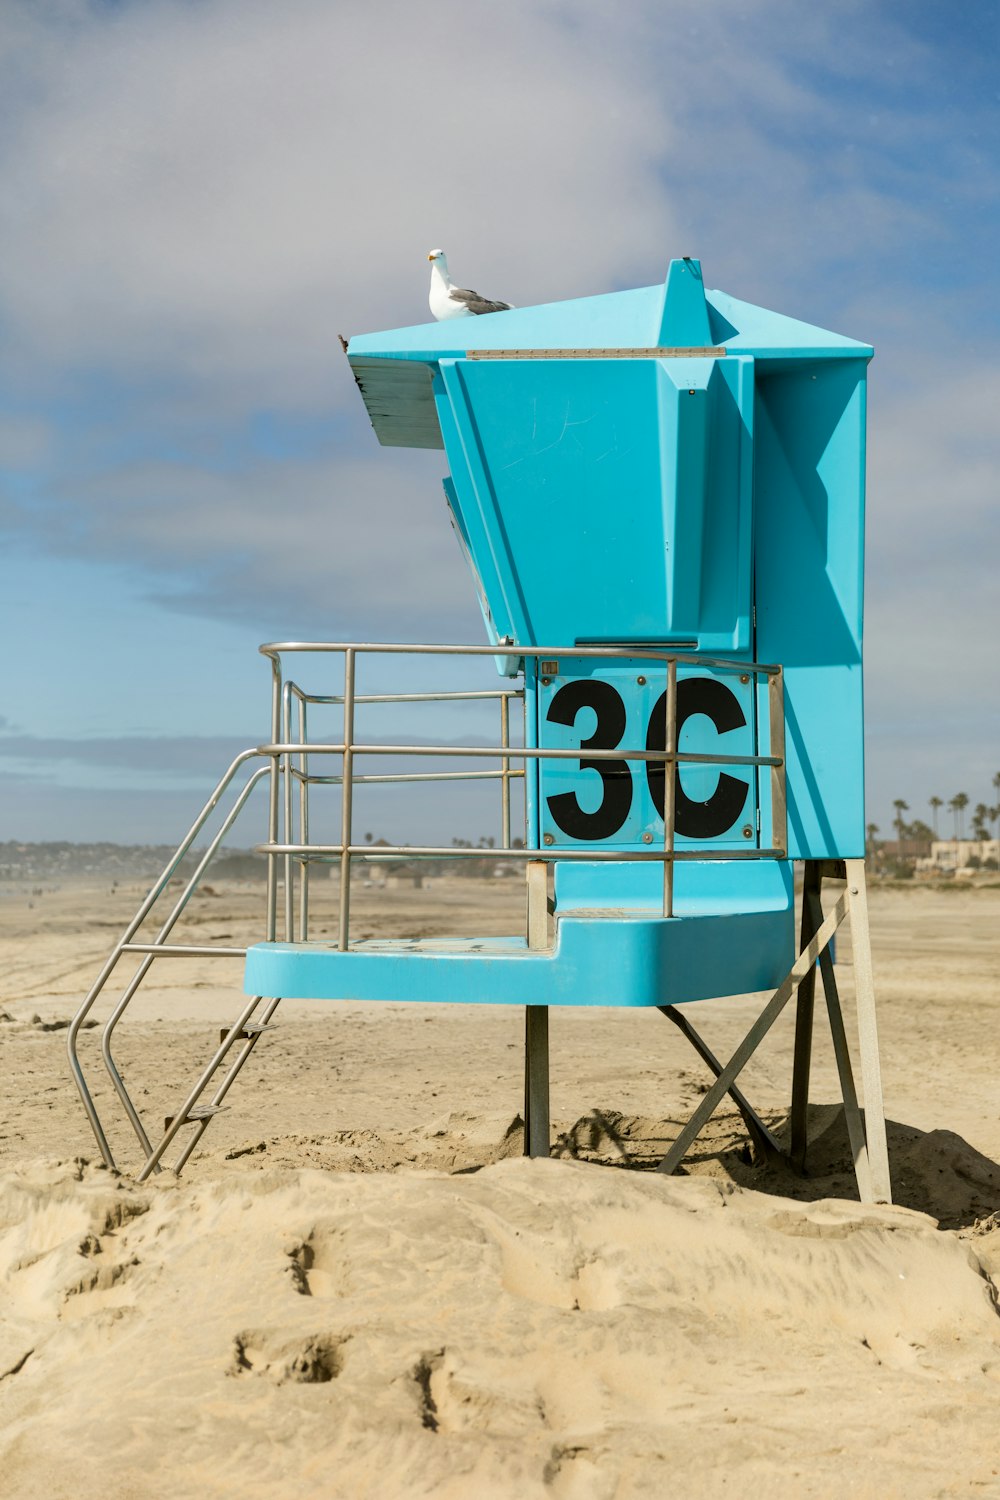 blue lifeguard tower on beach during daytime